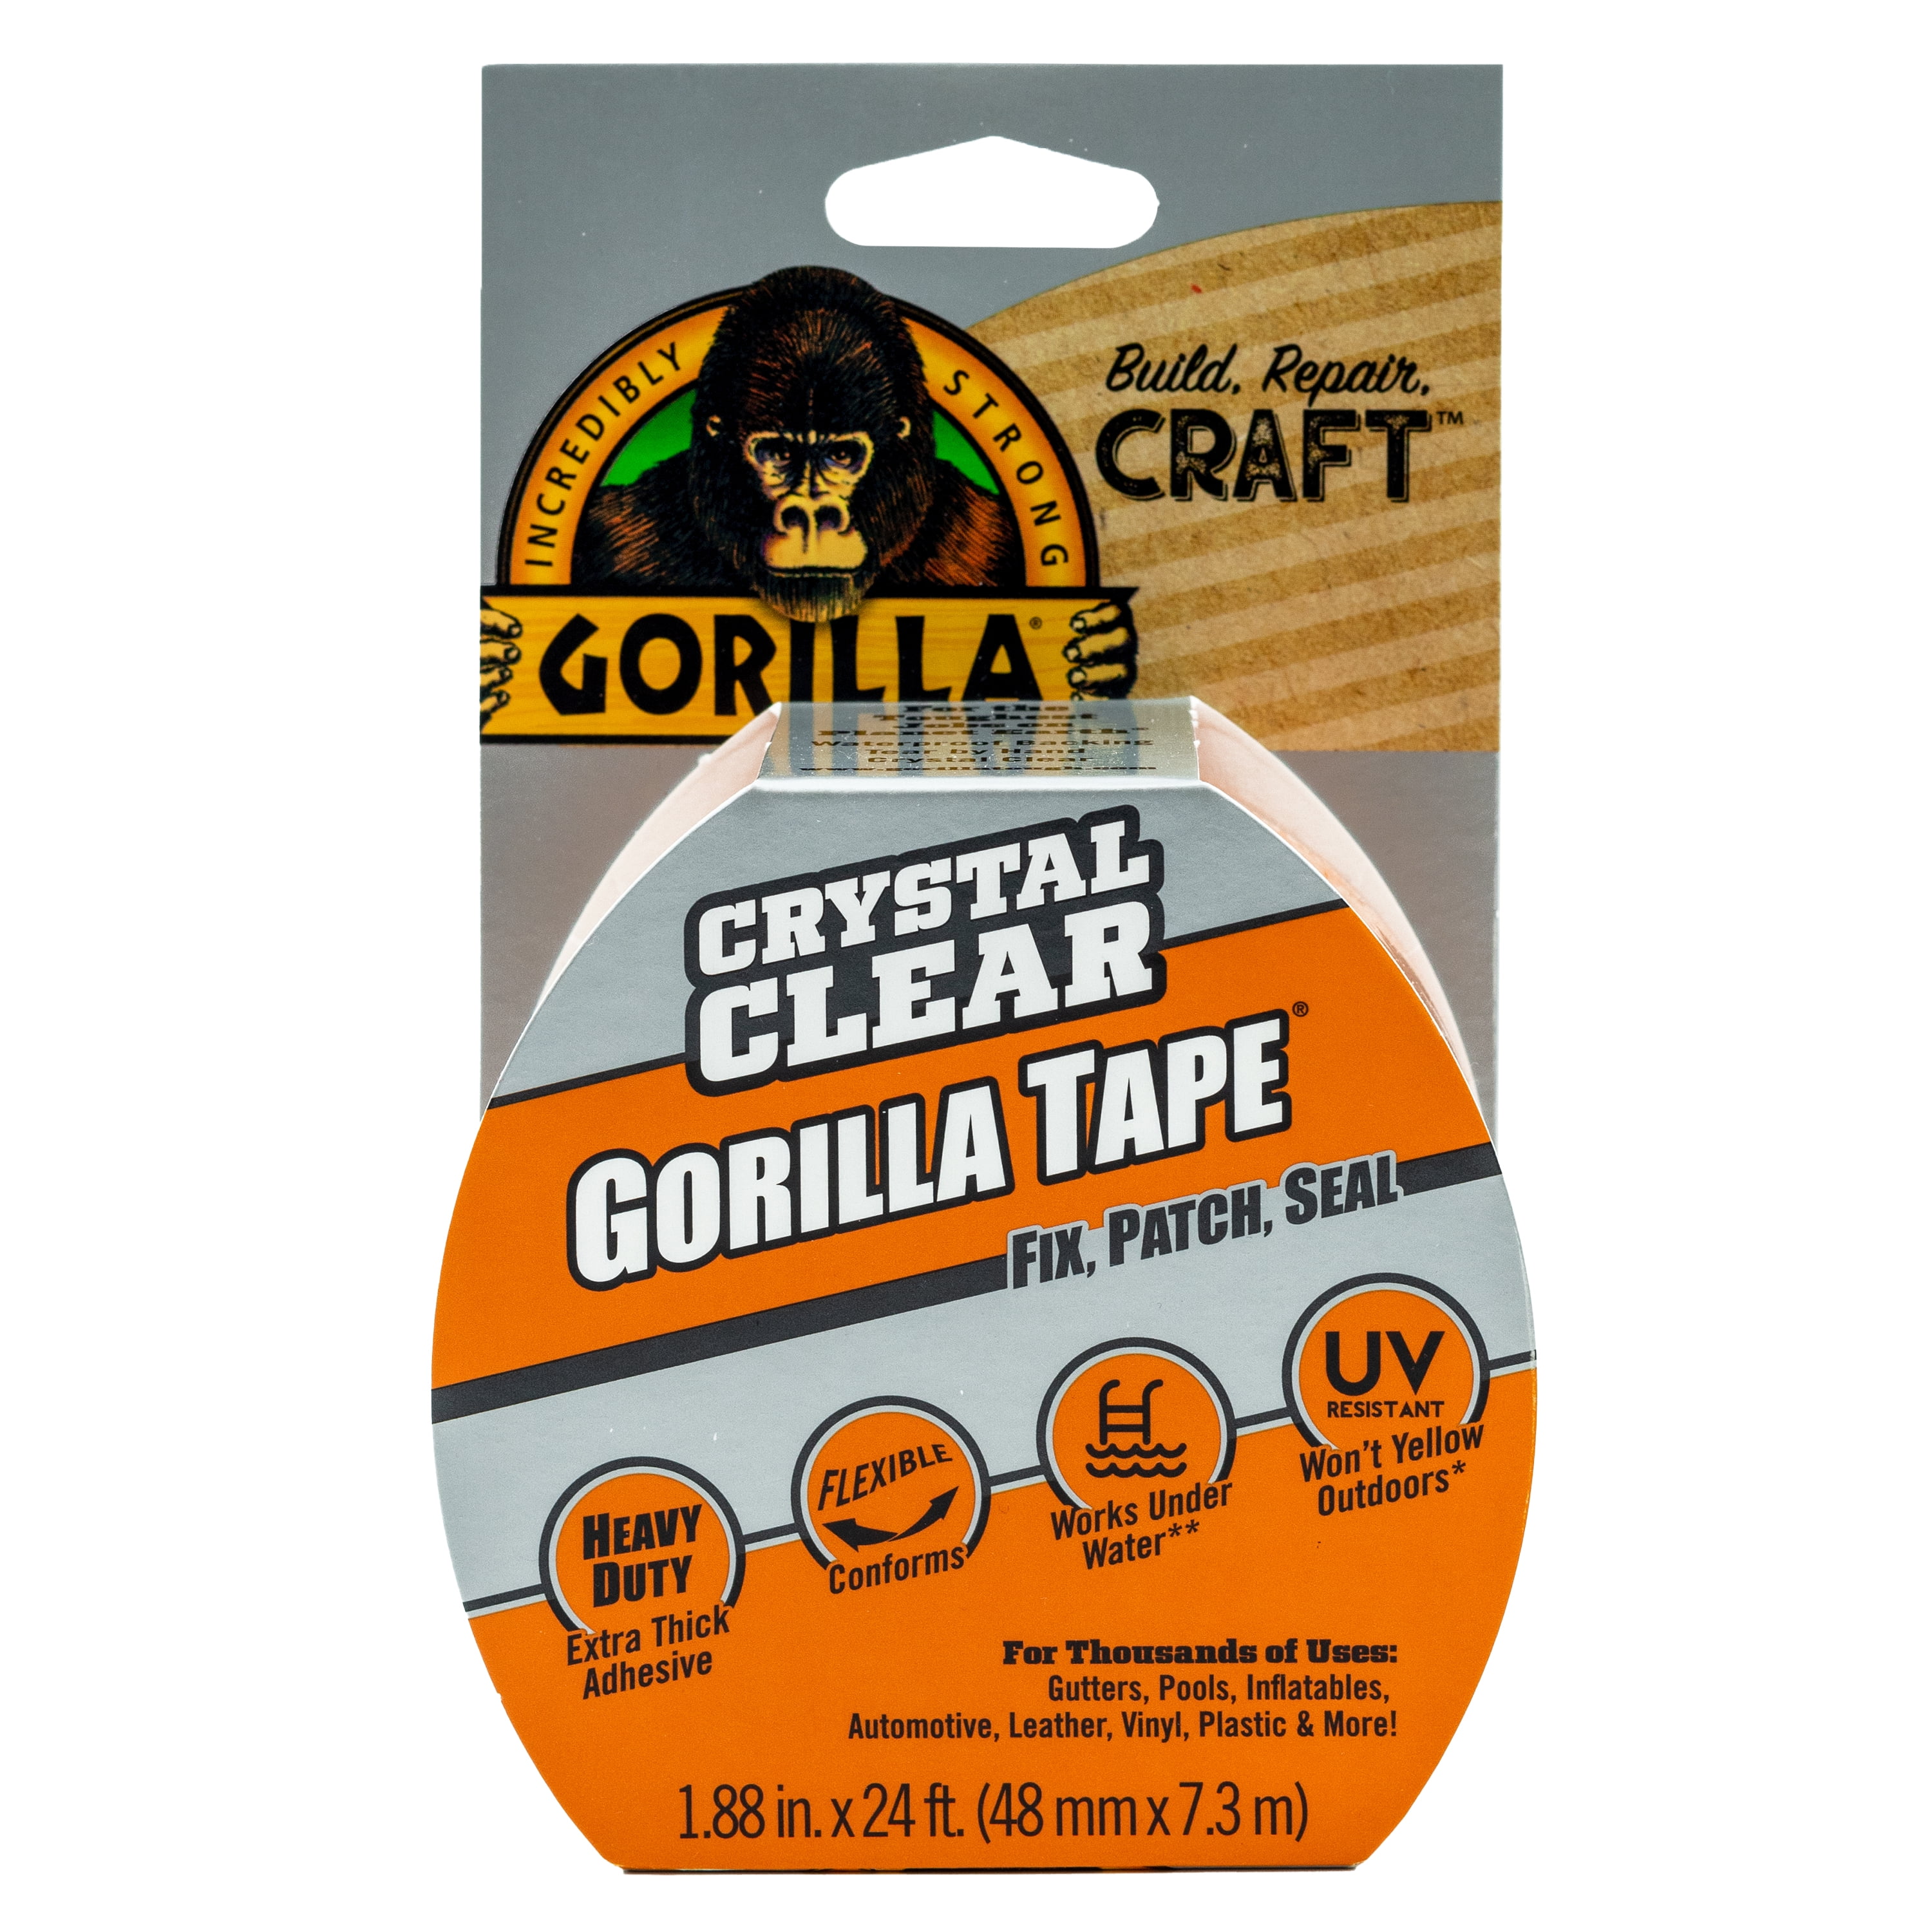 Crystal Clear Gorilla Tape